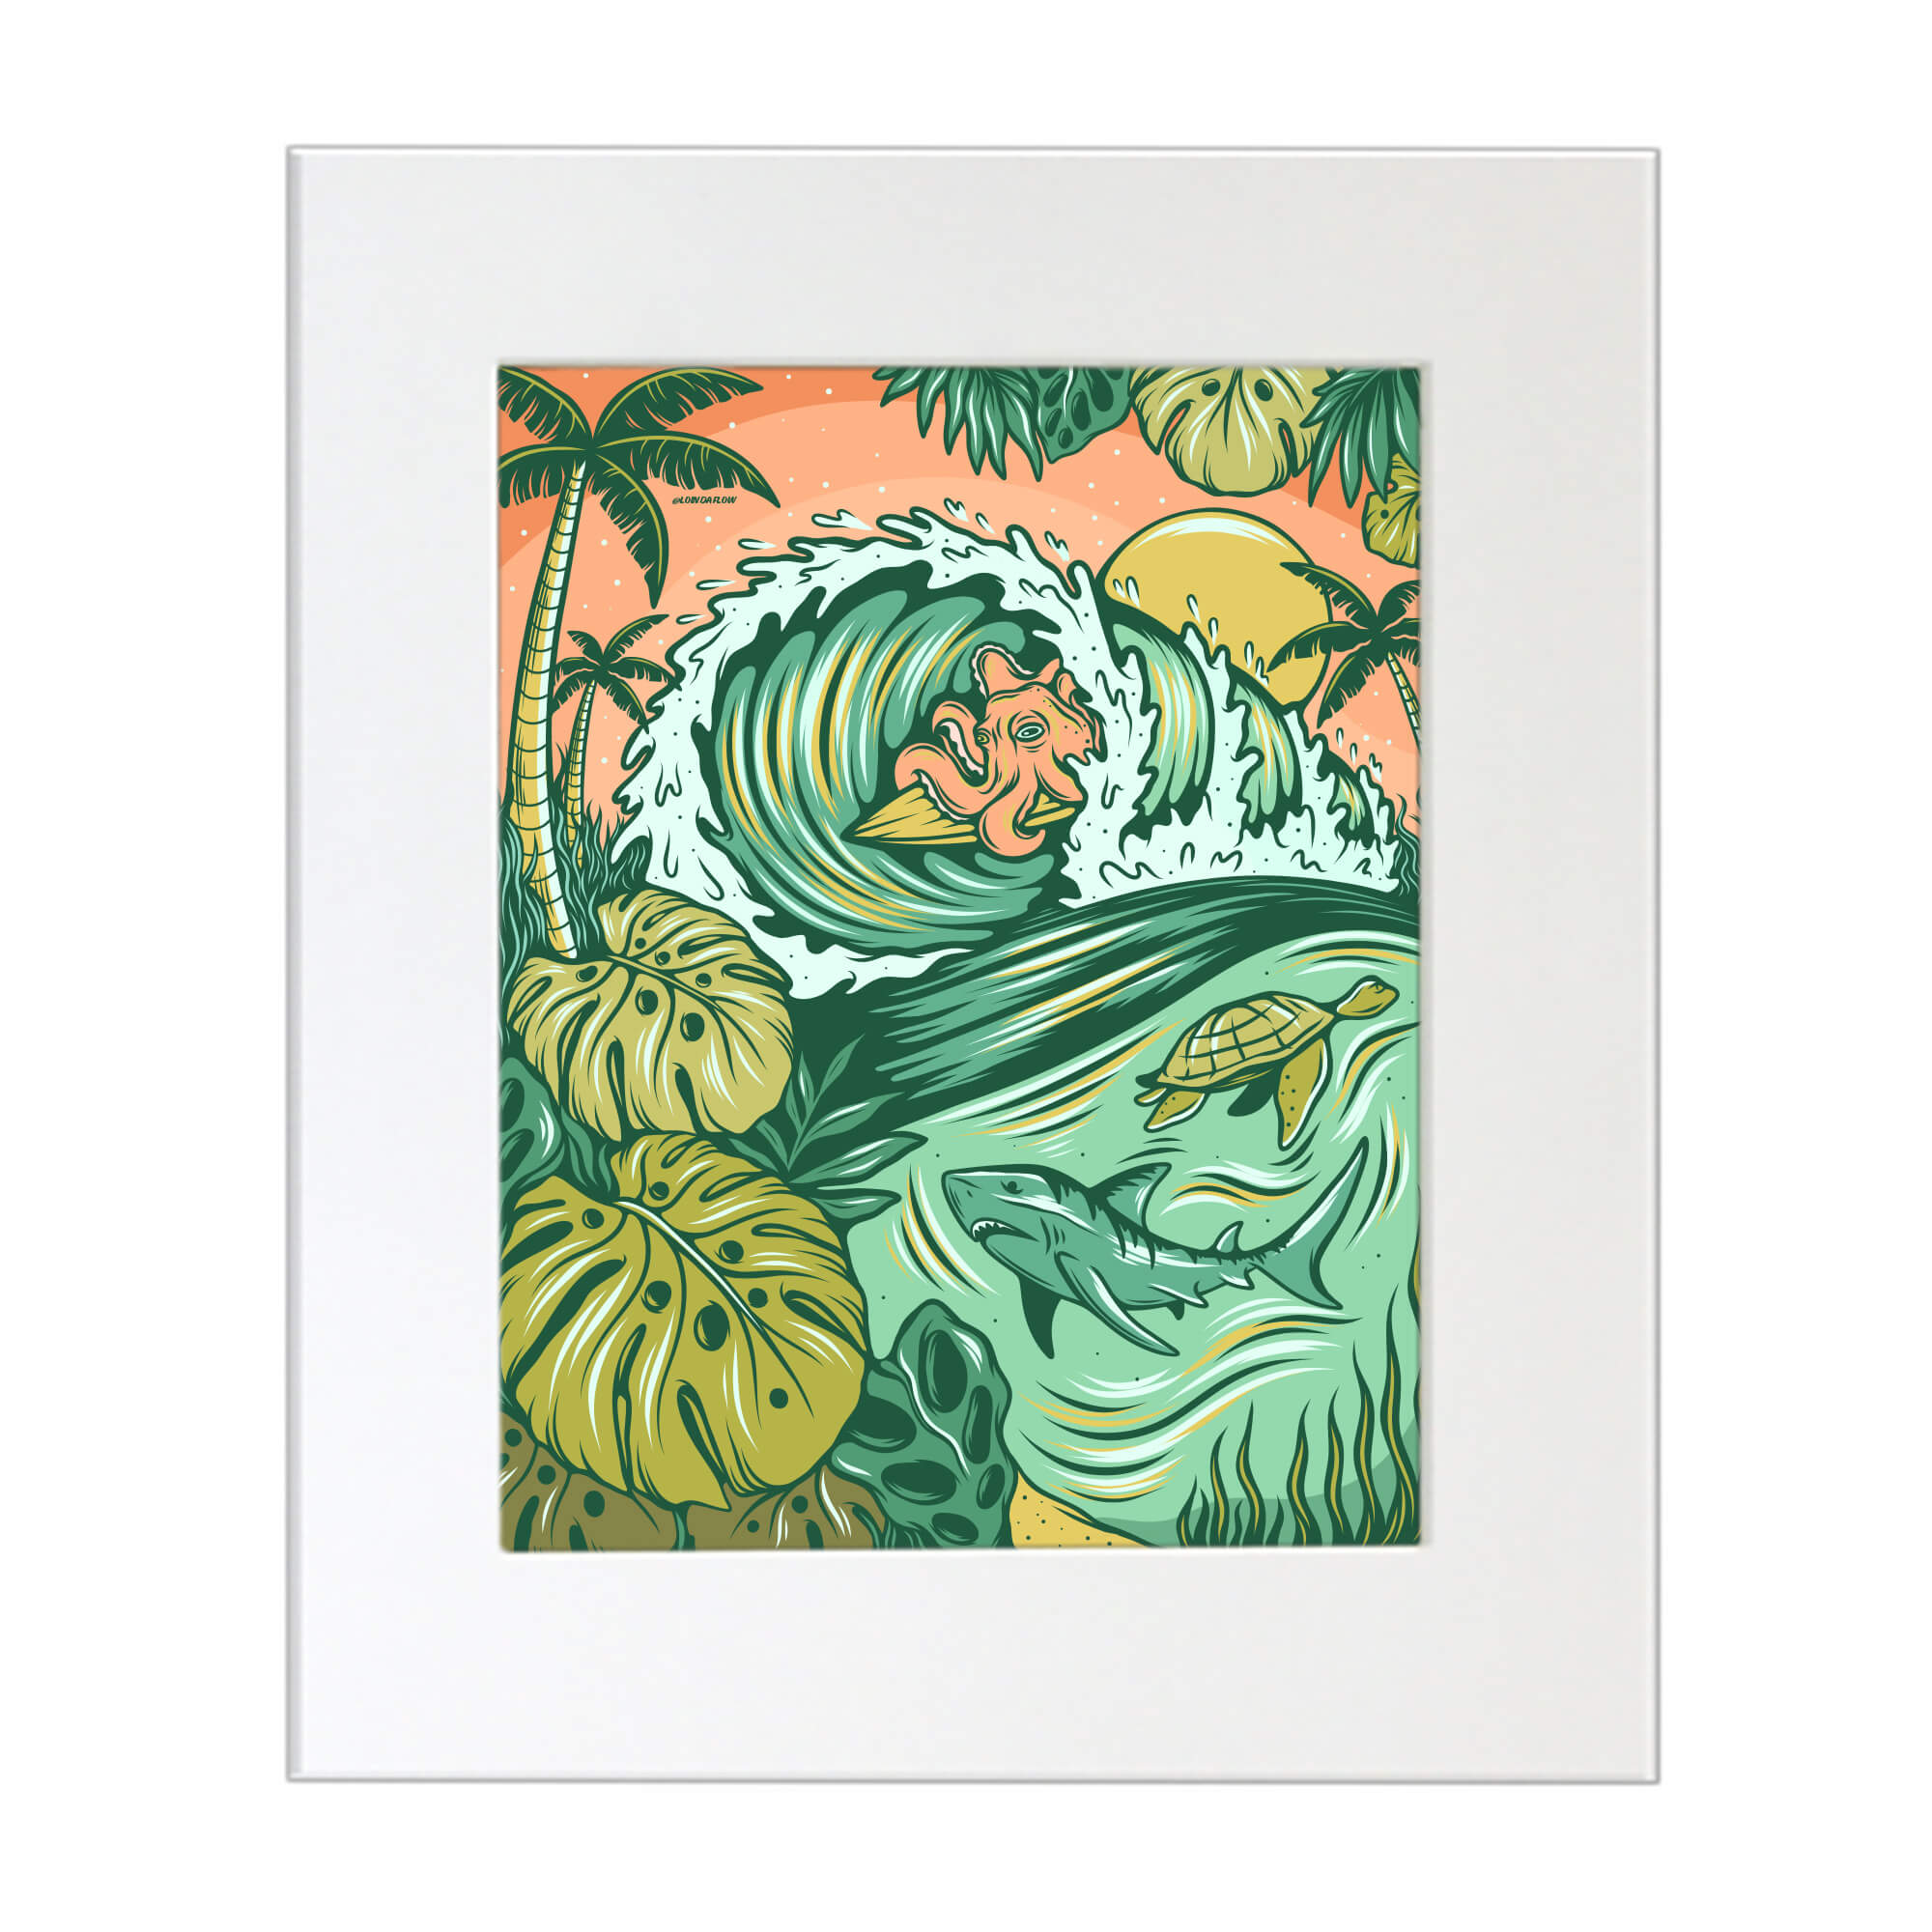 Matted art print of a some sea animals framed by tropical plants by Hawaii artist Laihha Organna